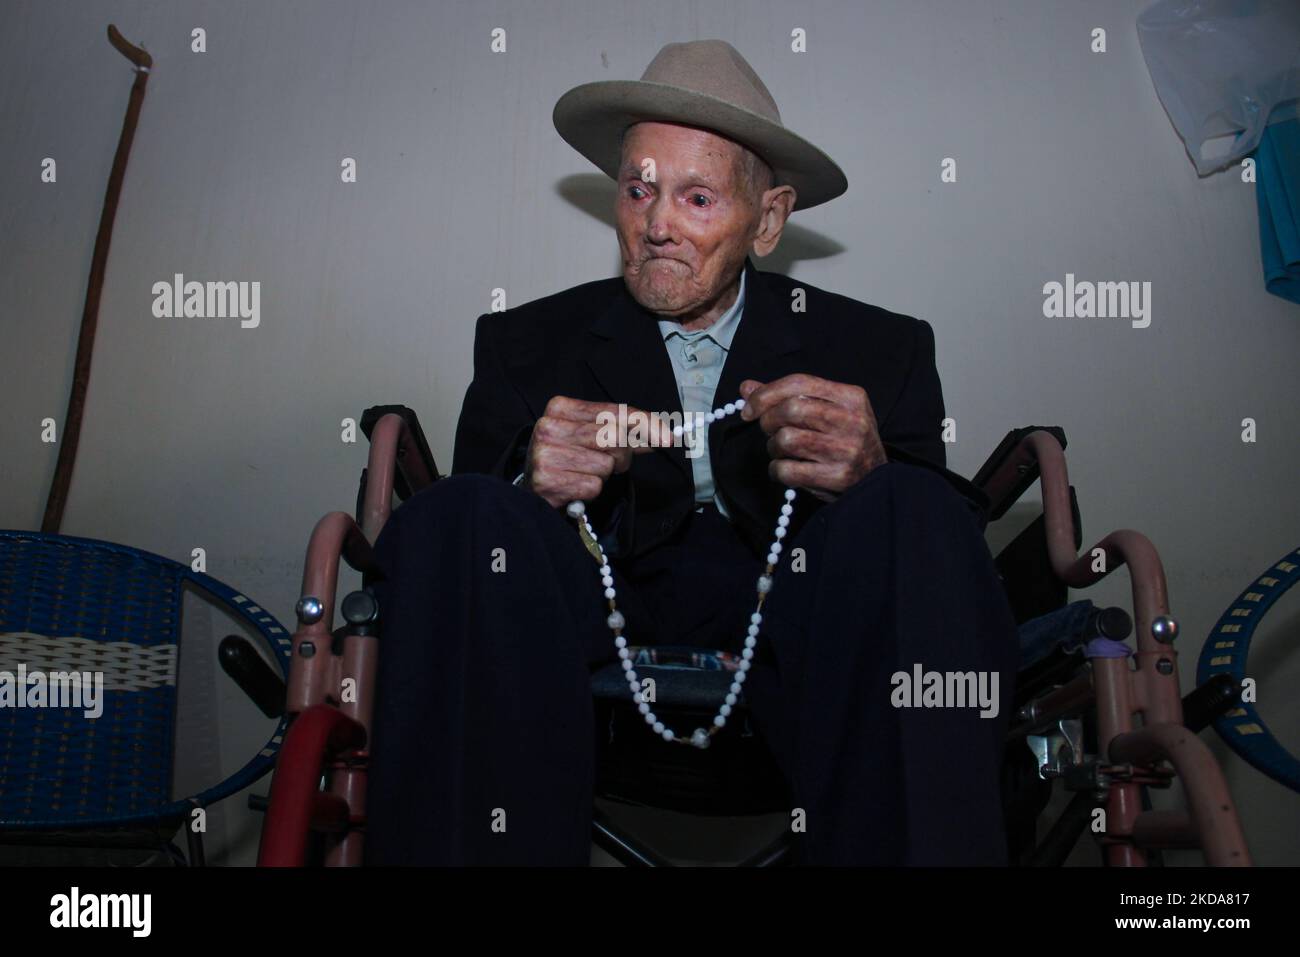 Juan Vicente Mora is seen posing for a photograph during an interview. San Jose de Bolivar, January 24, 2022. The oldest man in the world is the Venezuelan elder Juan Vicente Mora, with an age of 112 years and 253 days, officially recognized by the Guinness Book of World Records, who informed that he is officially the 'oldest' male person in the world. He was born on May 27, 1909 in El Cobre, Táchira State, Venezuela. Juan Vicente has 28 grandchildren, 41 great-grandchildren and 112 great-great-grandchildren, the Guinness Book said on Twitter. (Photo by Jorge Mantilla/NurPhoto) Stock Photo